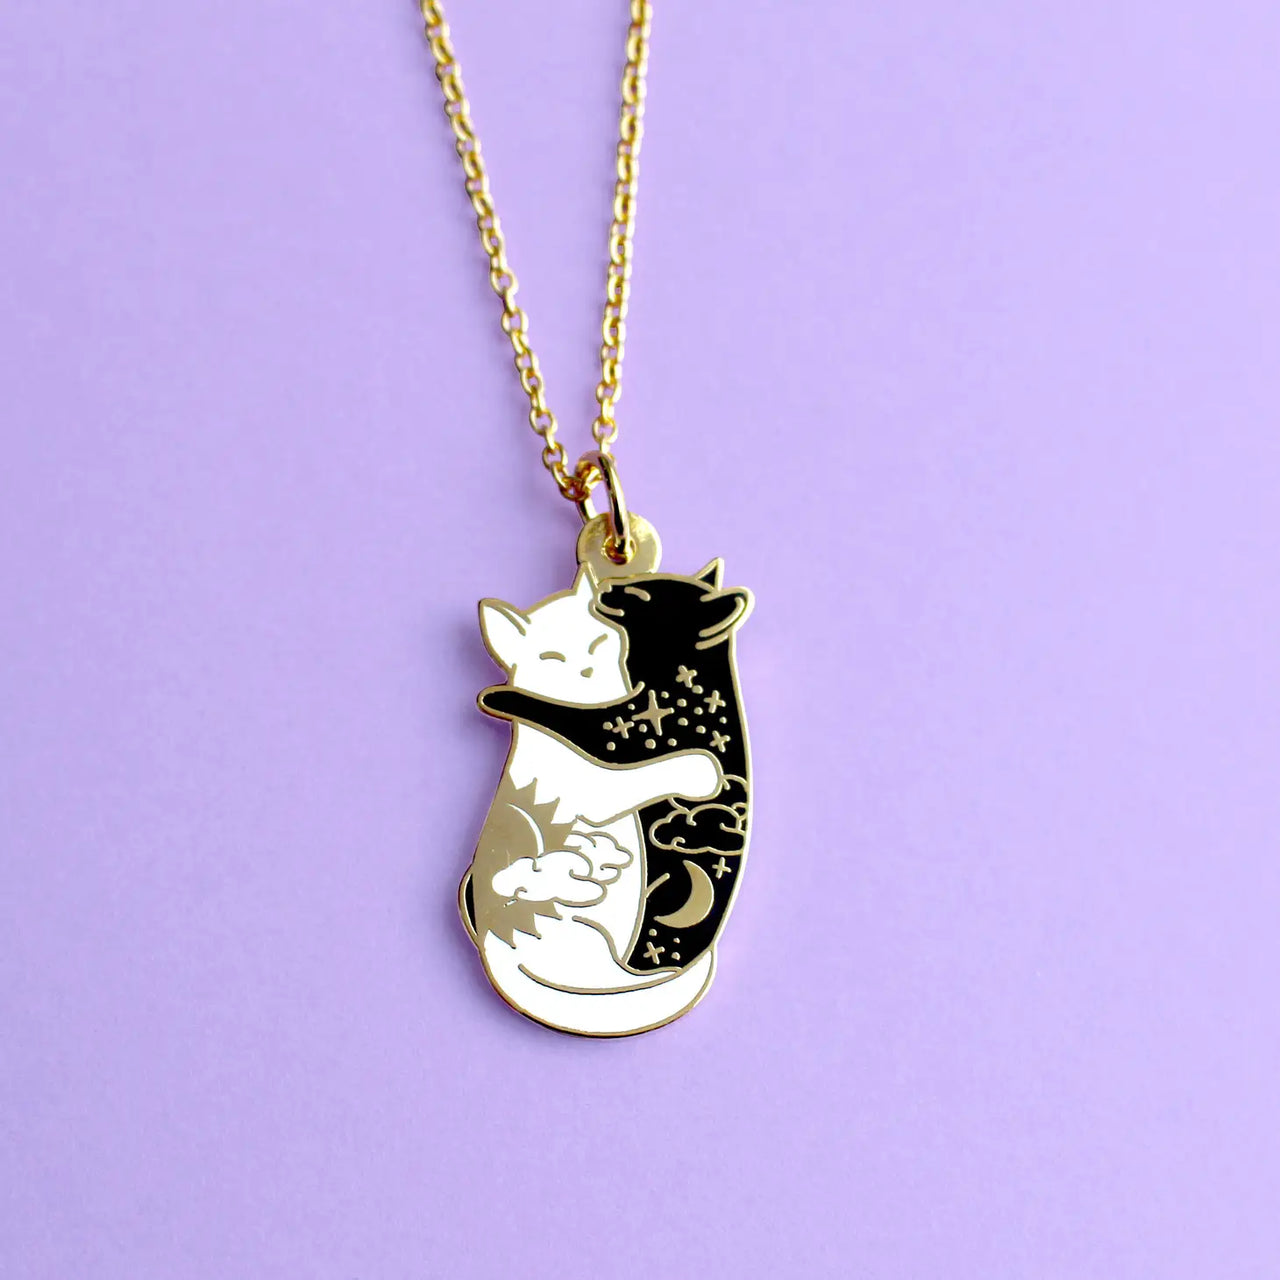 Day & Night Hugging Cats Necklace